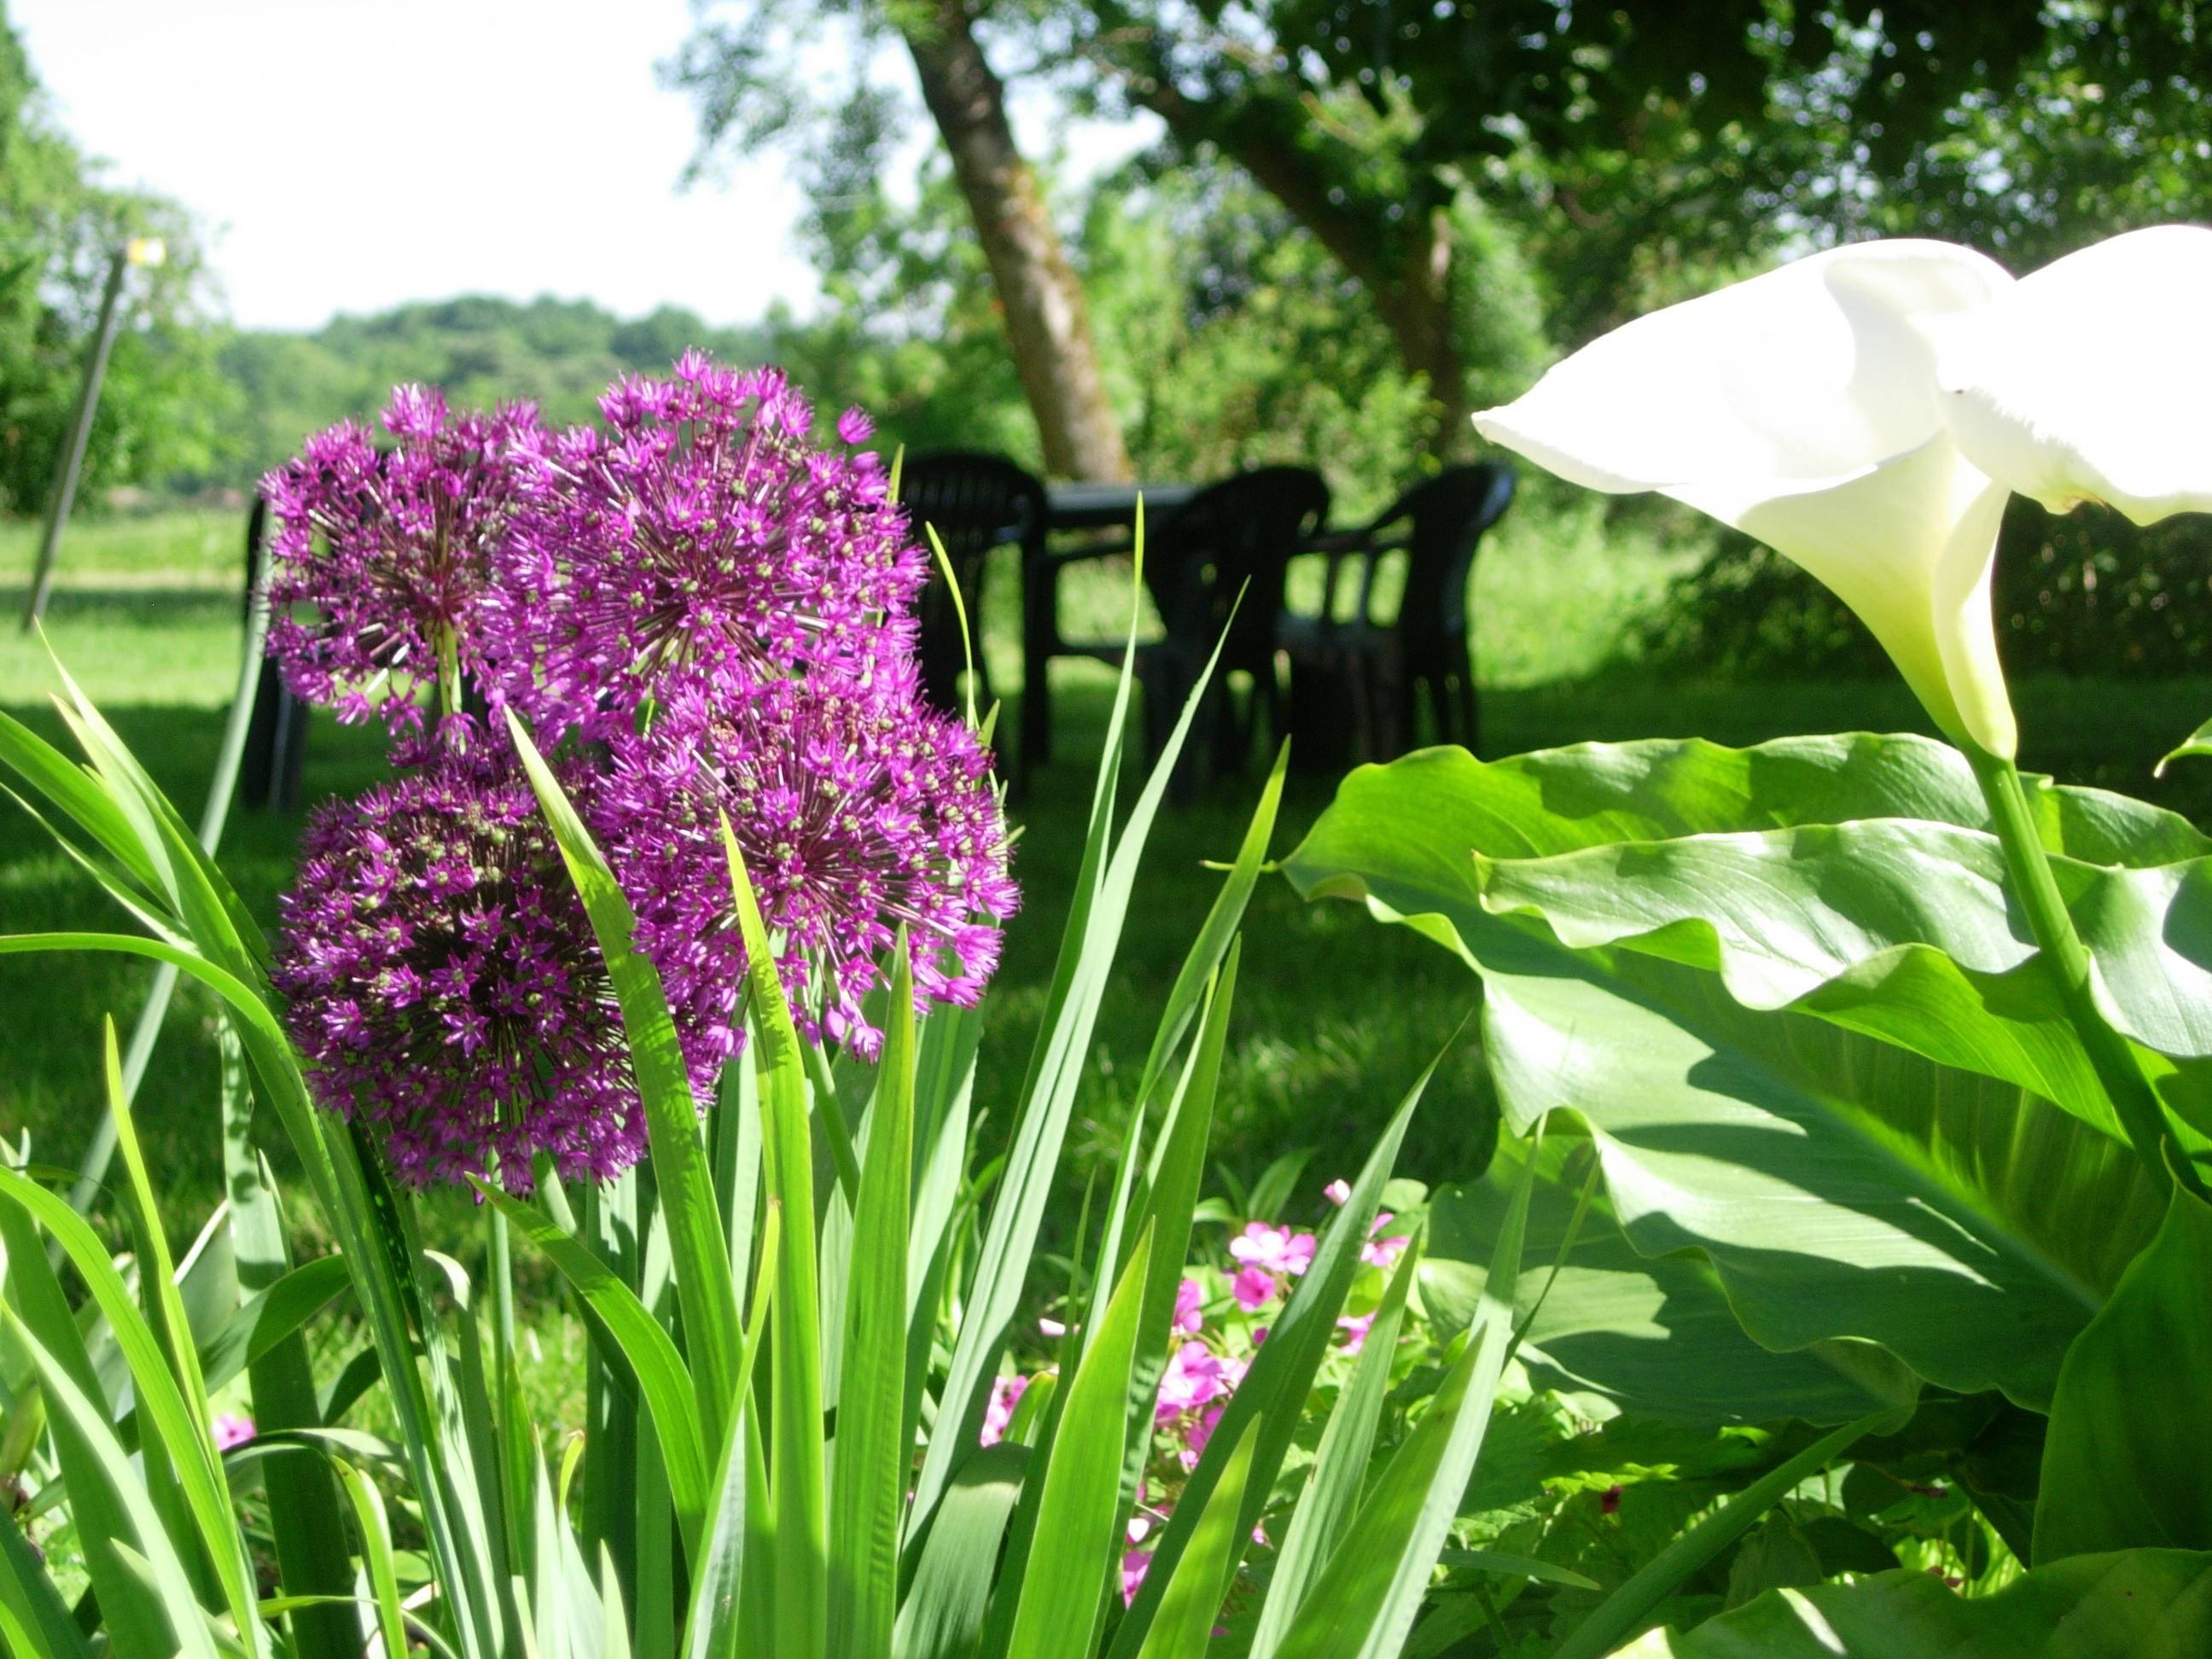 Alliums and Lillies growing on the front lawn of Barrusclet